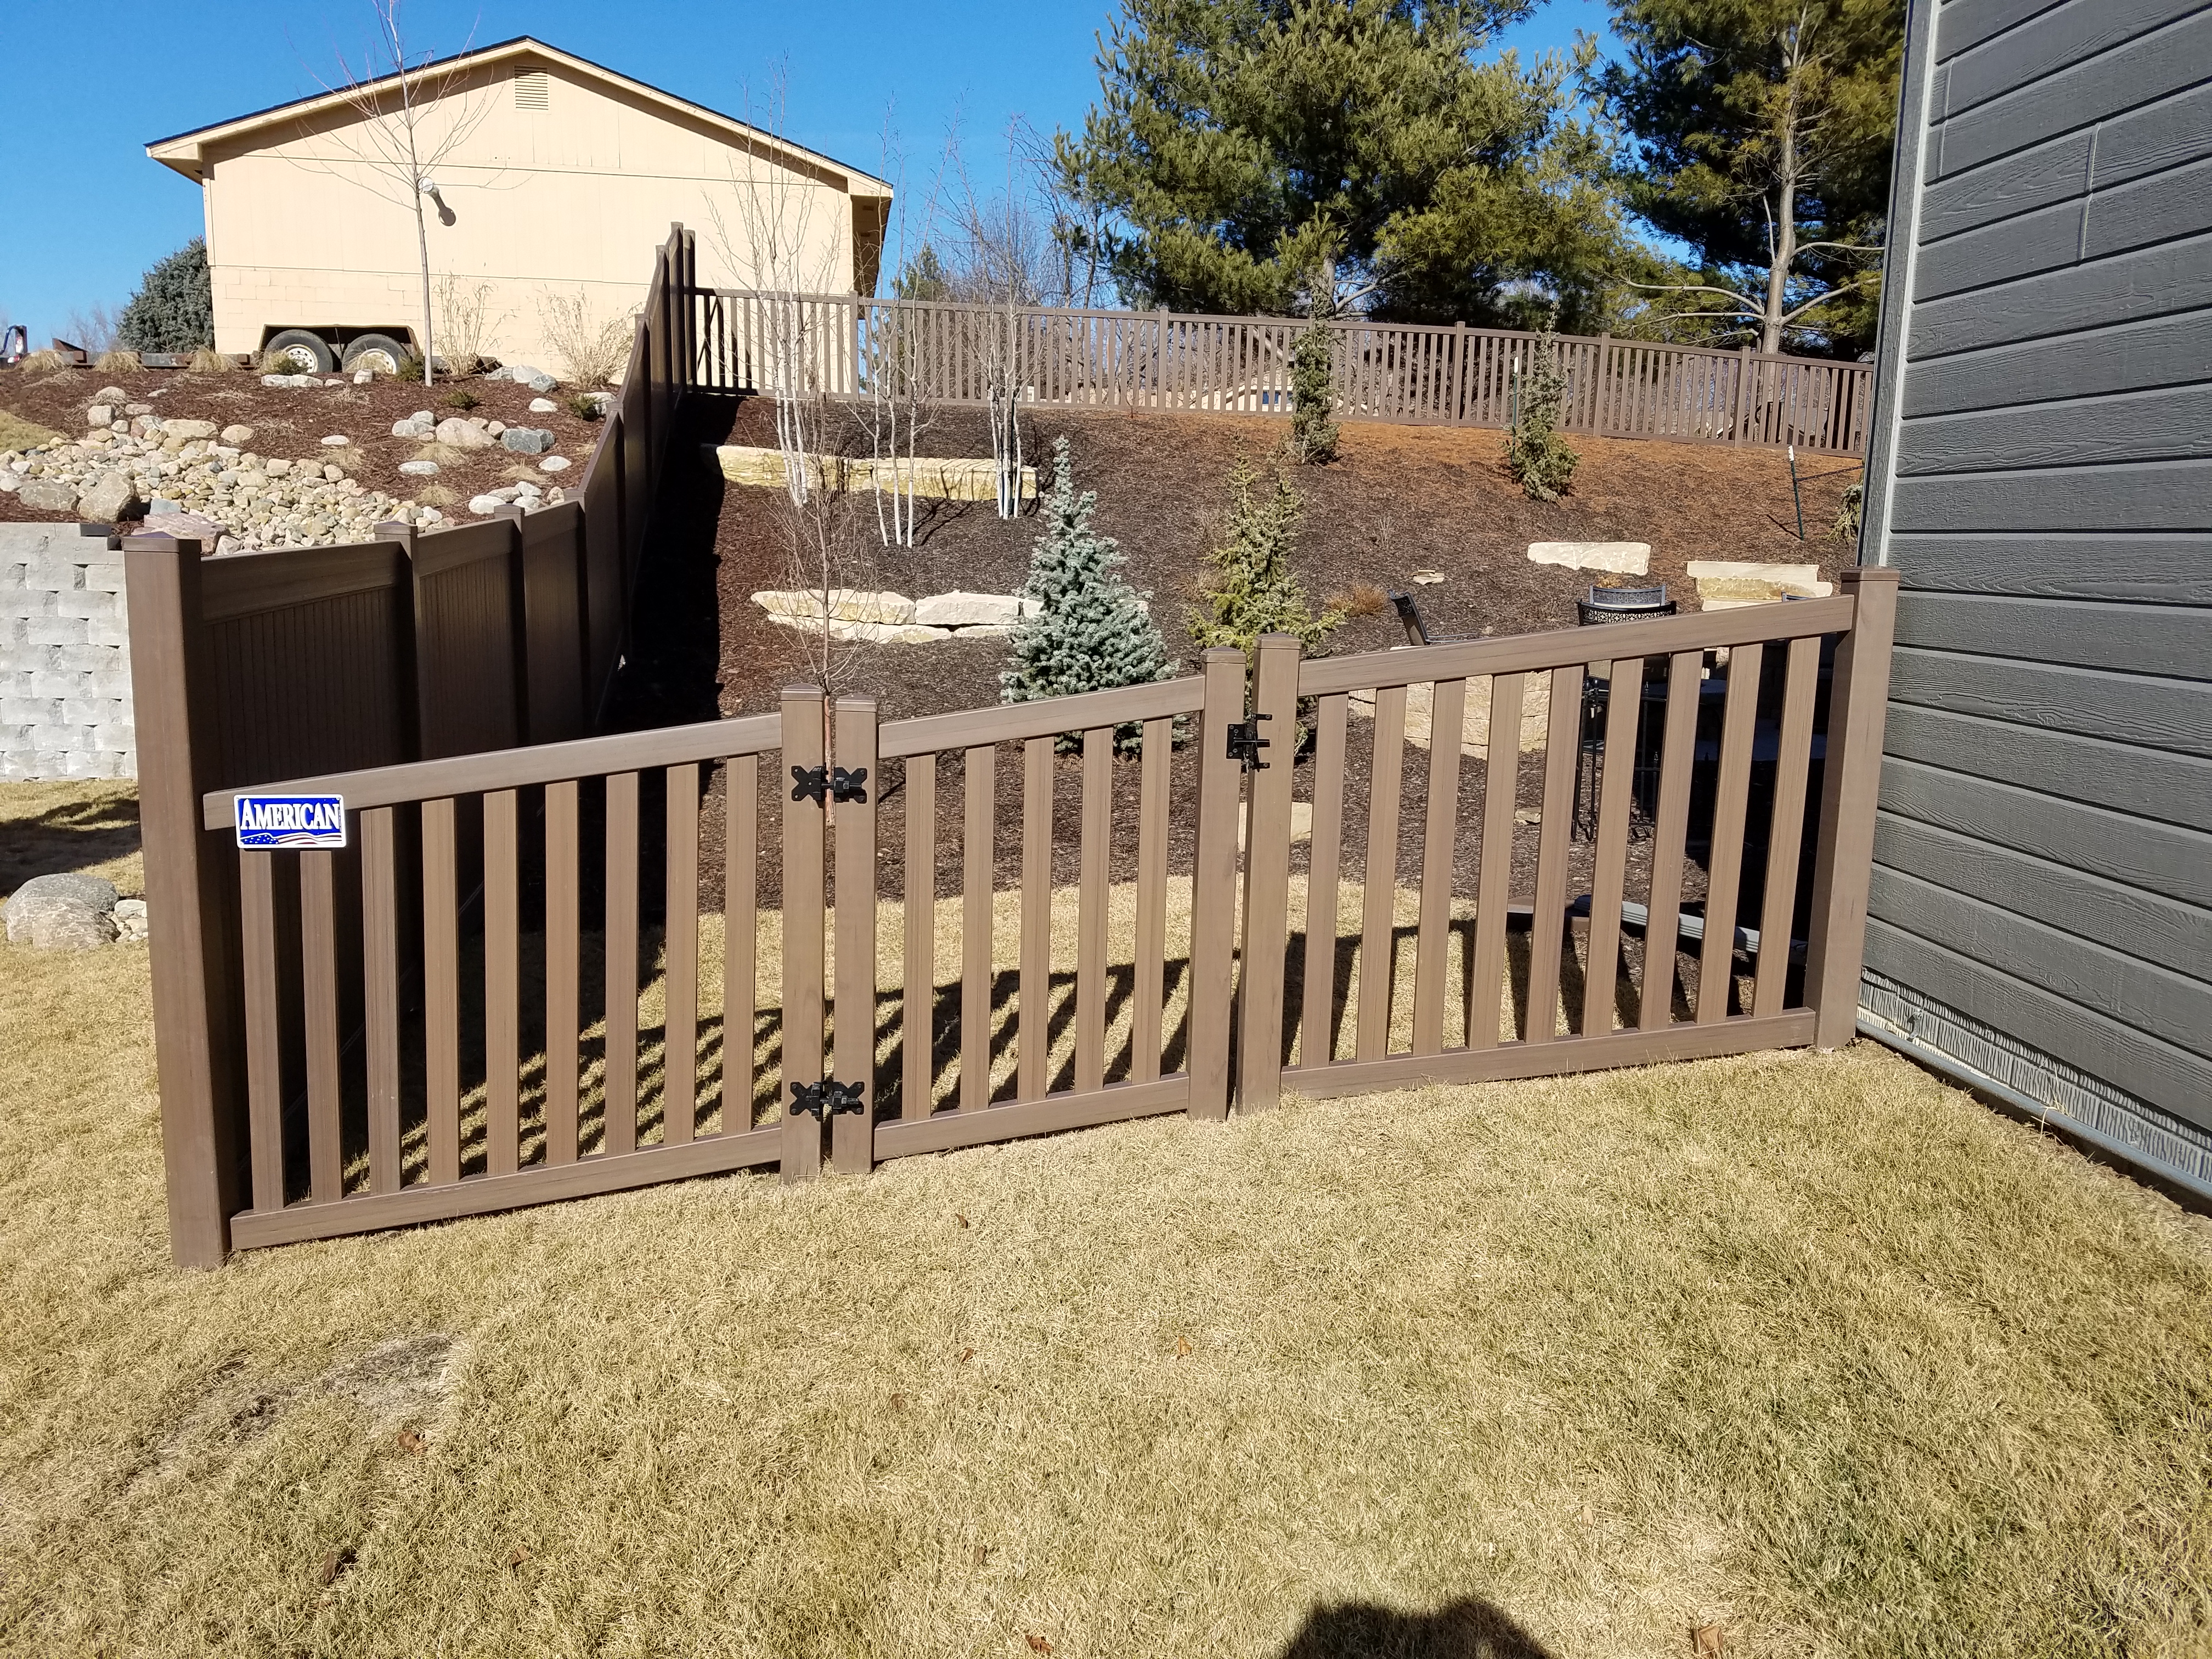 Chestnut Brown Vinyl Fence Special - The American Fence Company